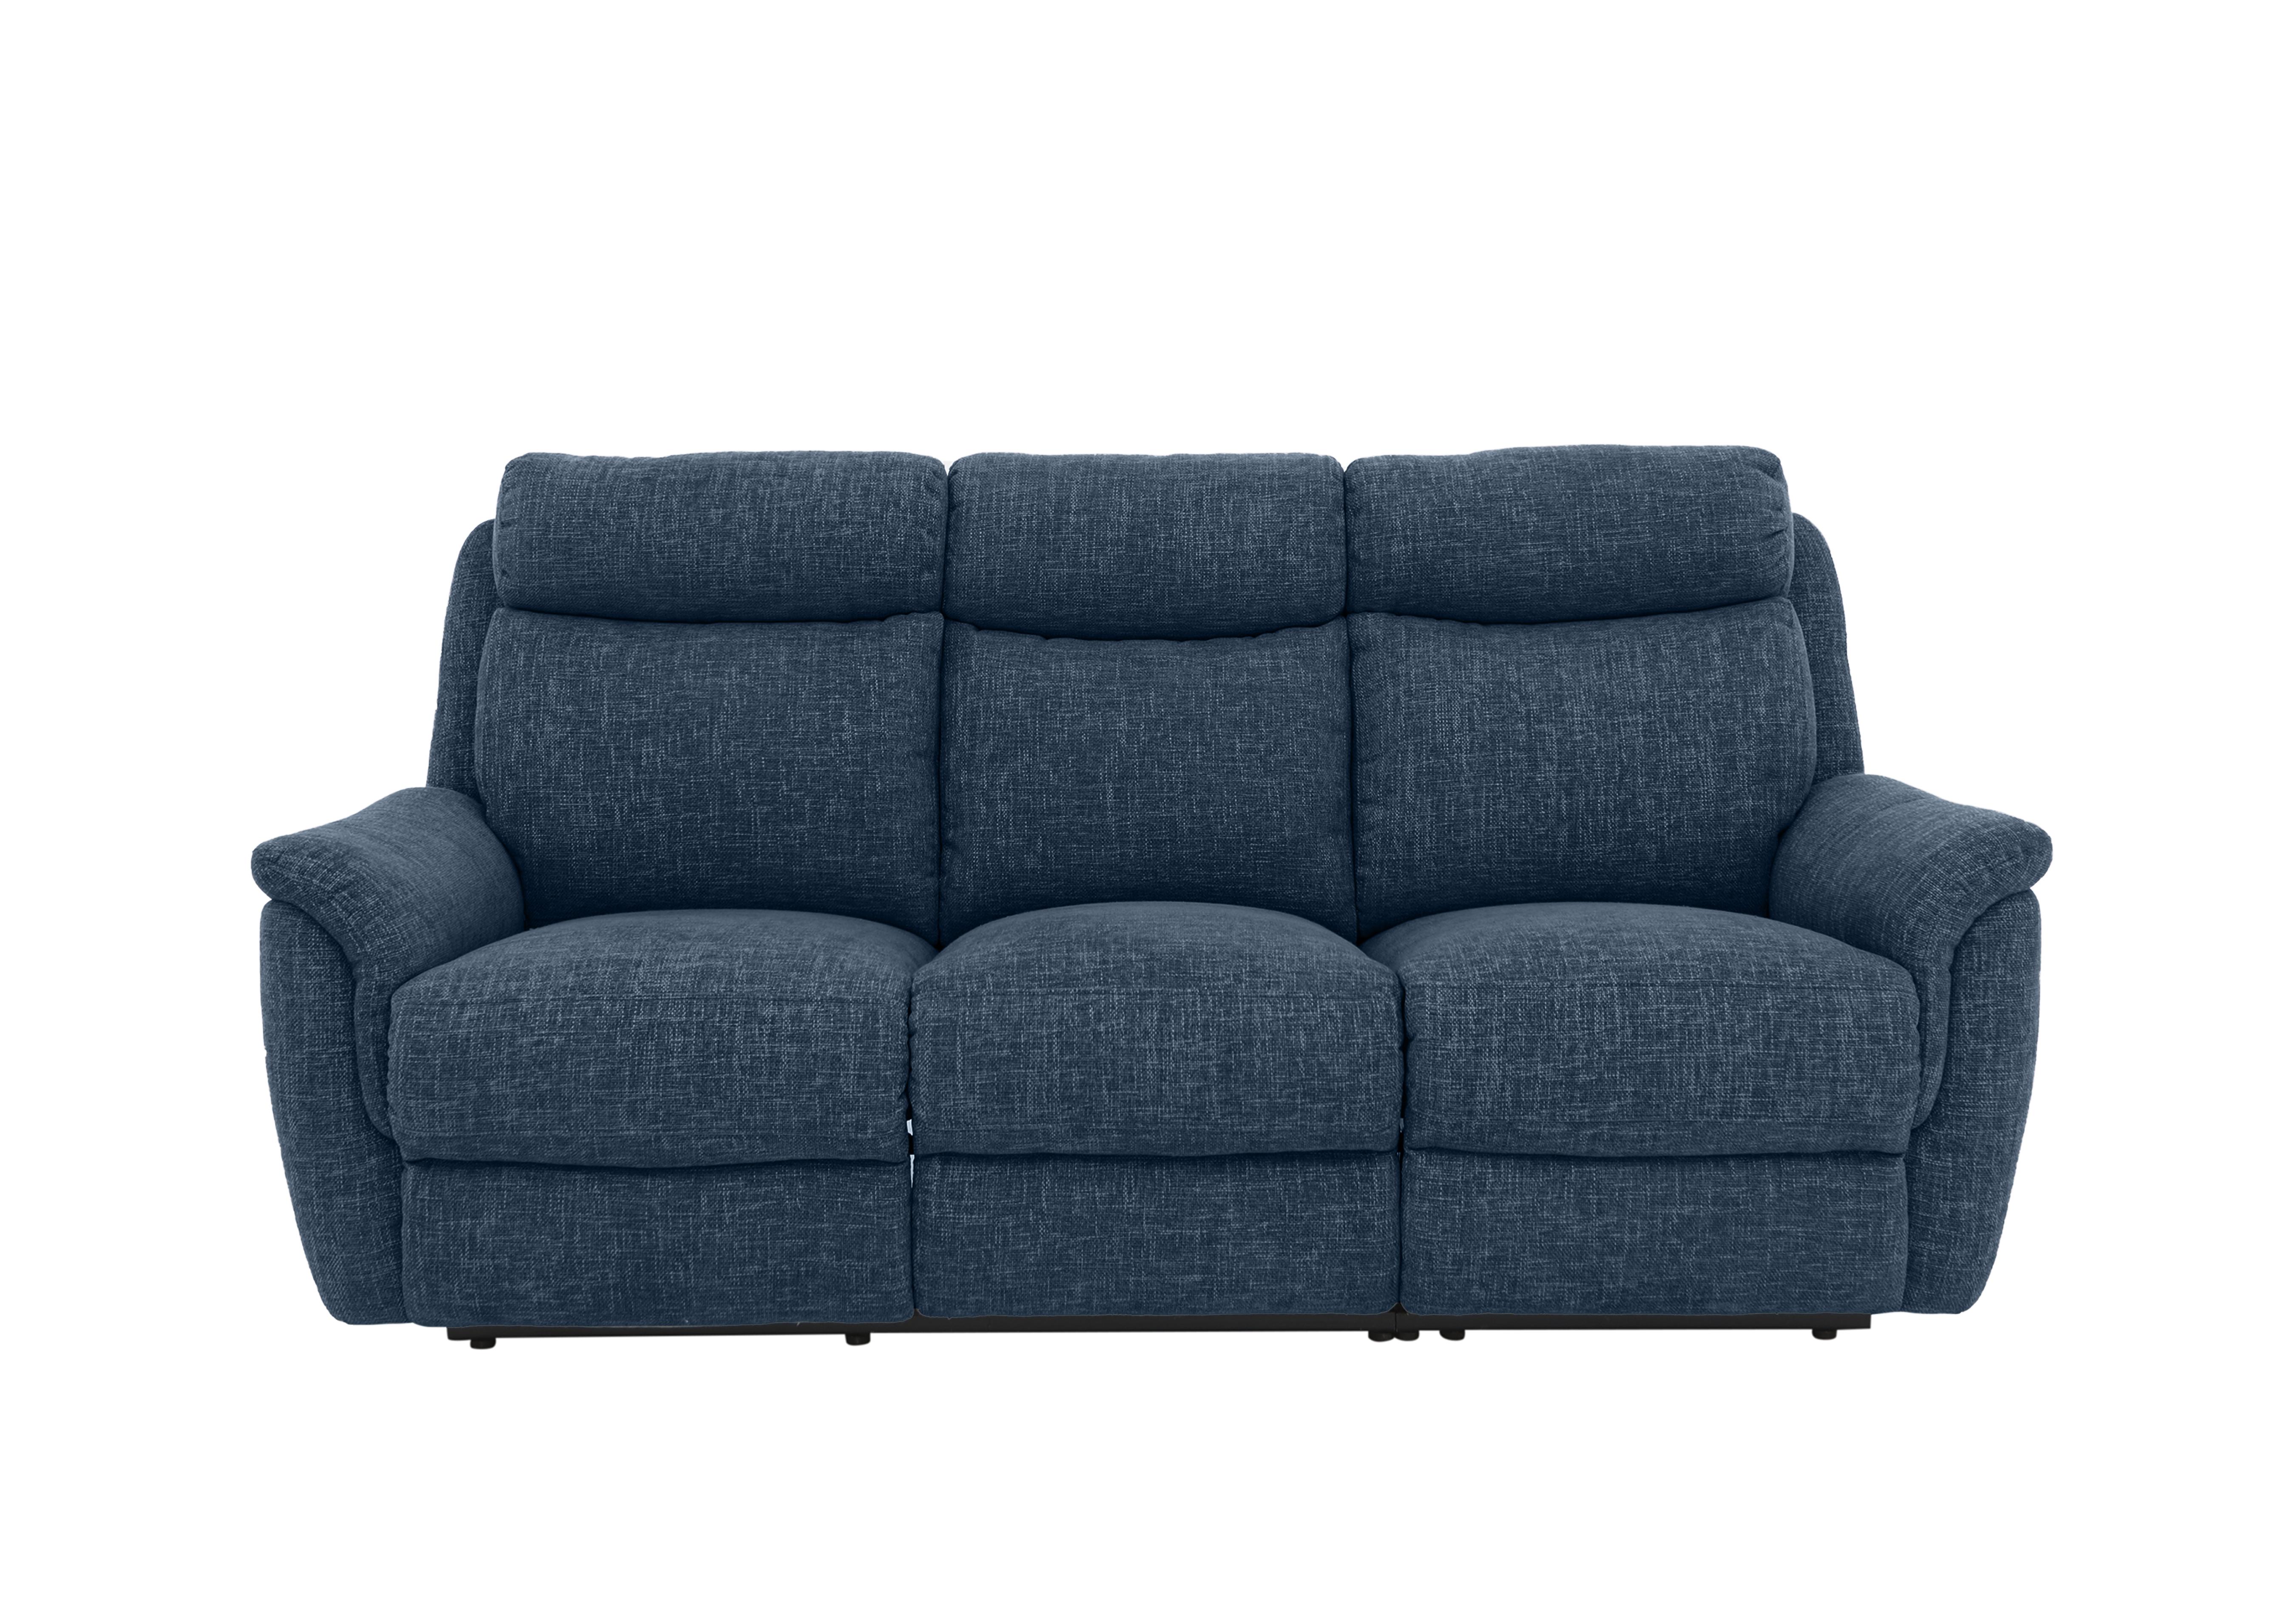 Orlando 3 Seater Fabric Power Recliner Sofa with Power Headrests and Lumbar Support in Anivia Blue 15045 on Furniture Village